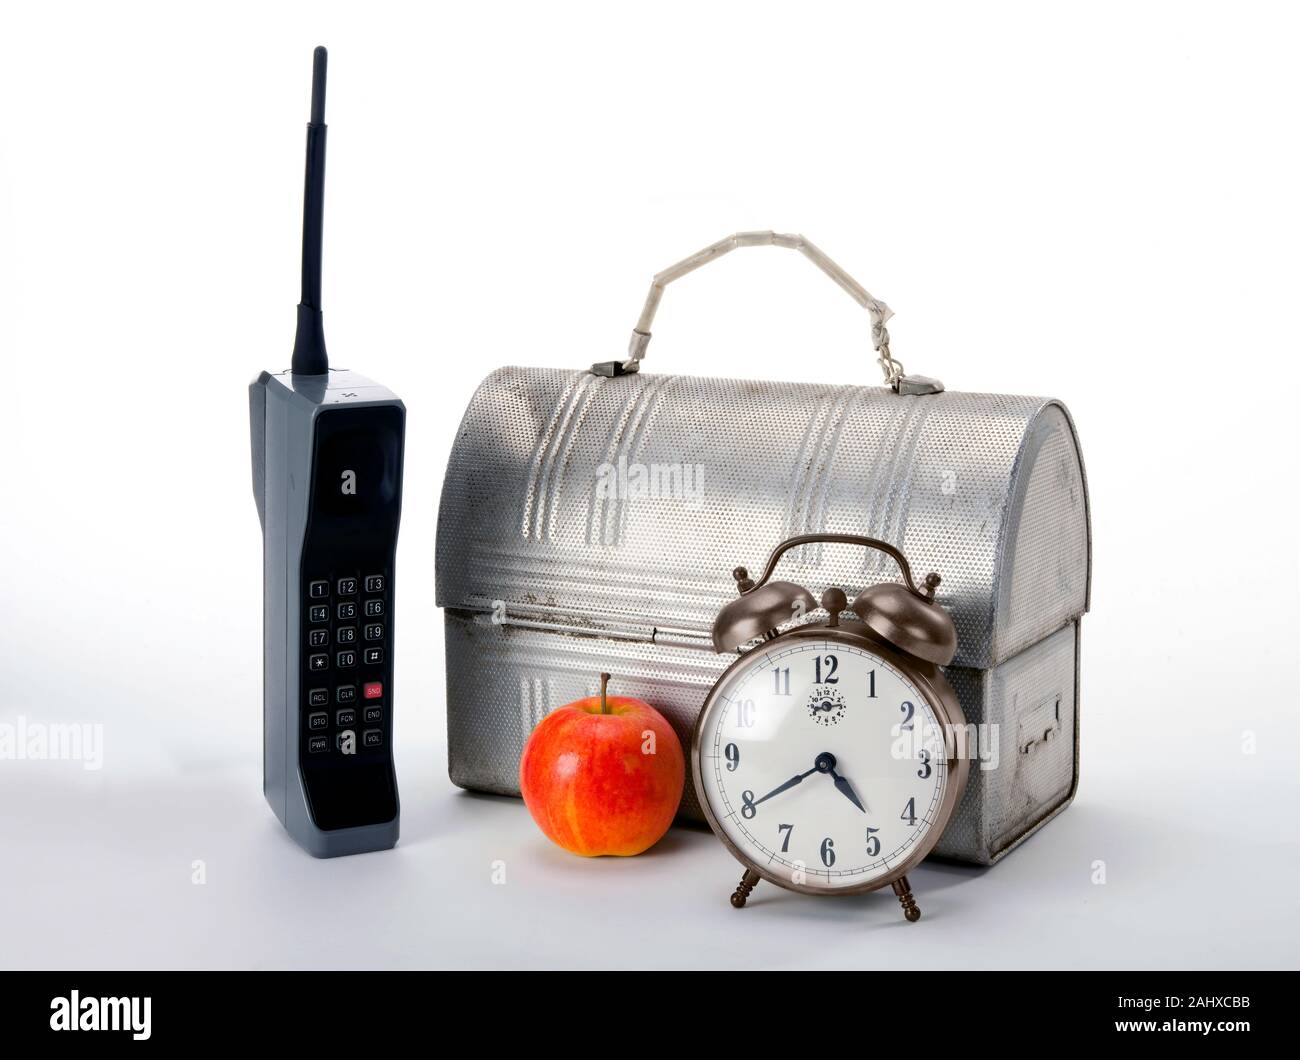 Work time in the 1980's with brick cell phone lunch box and red apple. Stock Photo